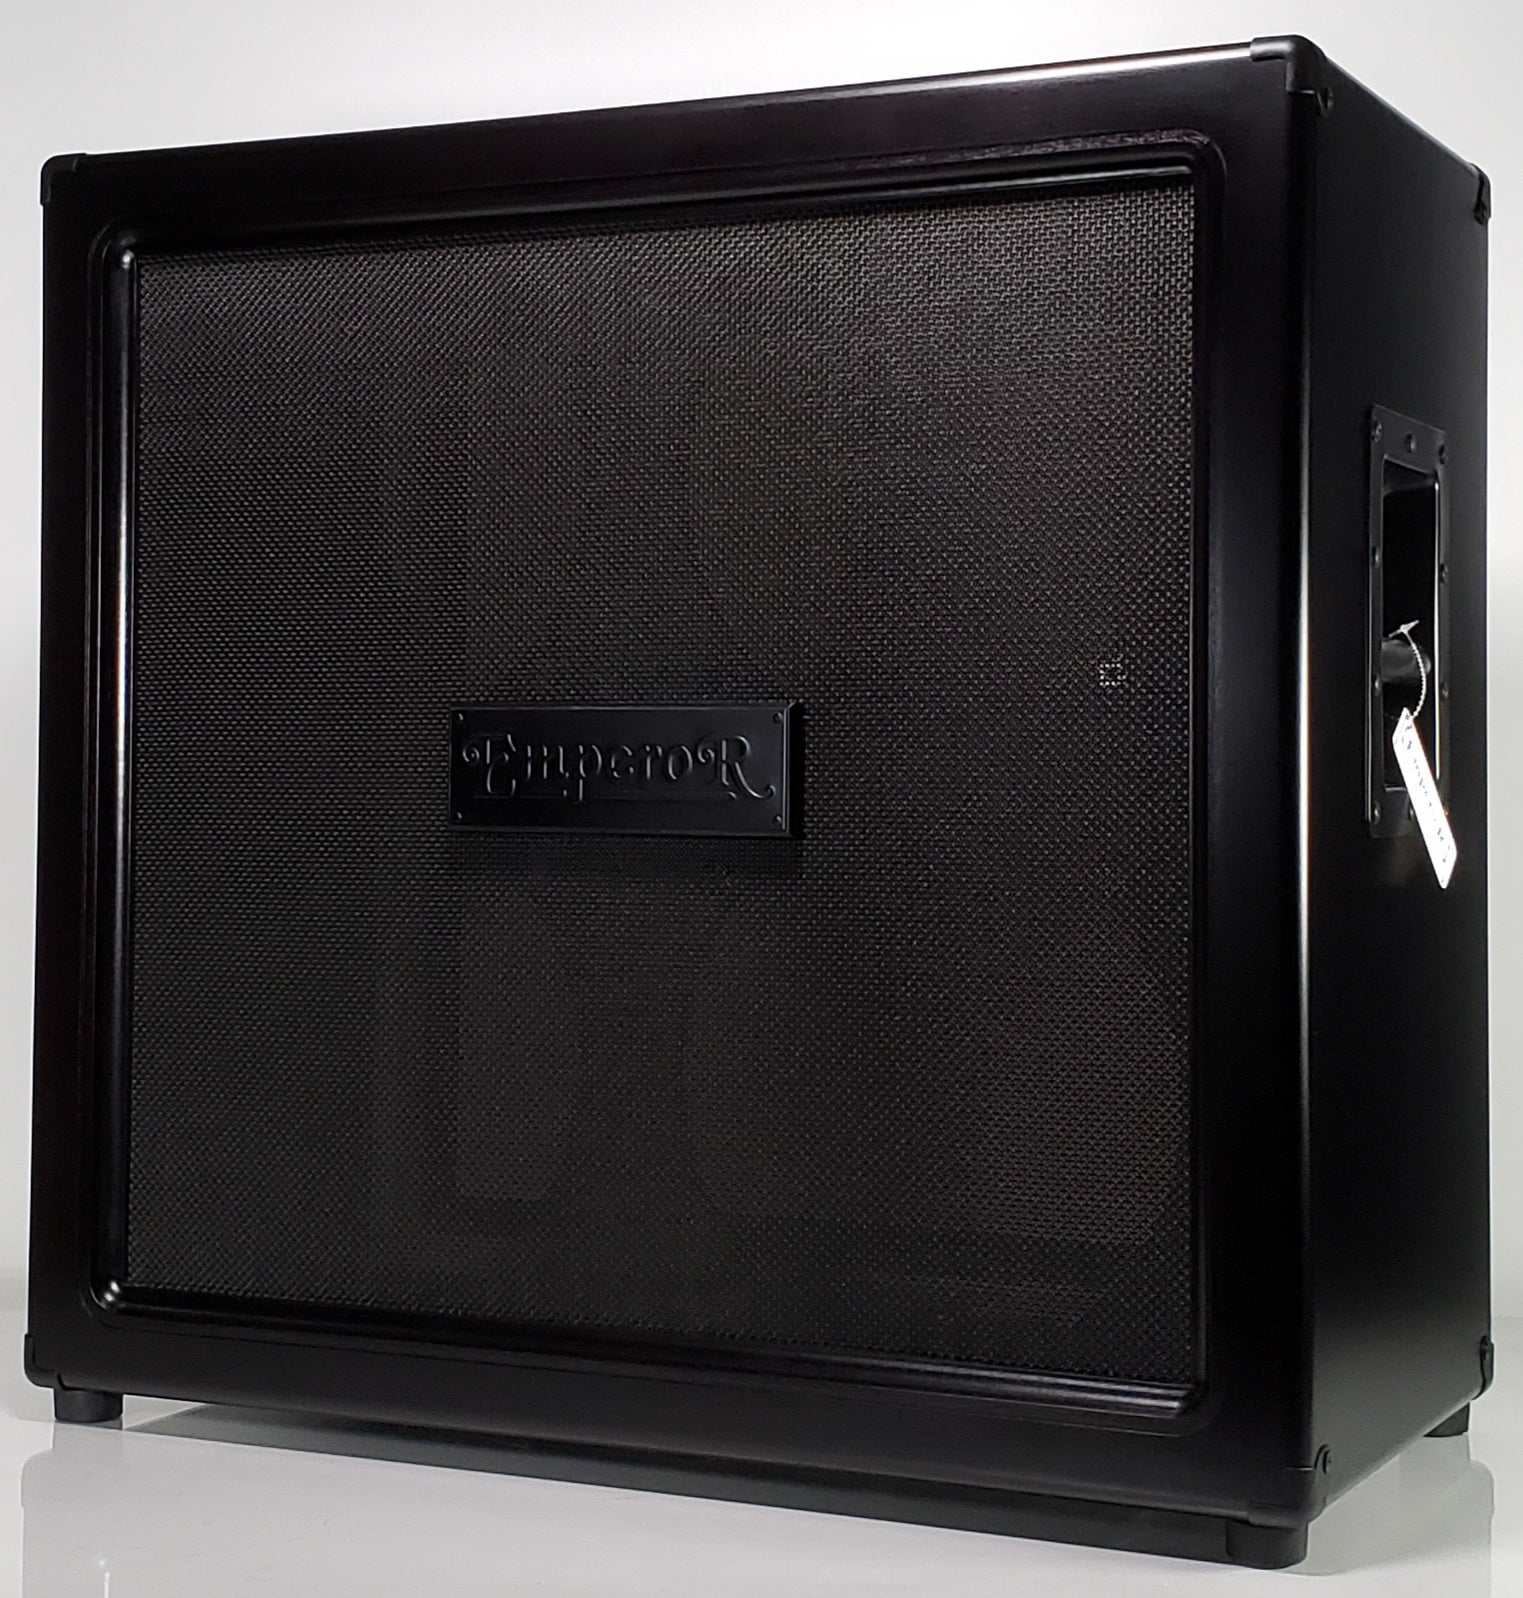 Blackened 4x12 RS Guitar Cabinet - Emperor Cabinets